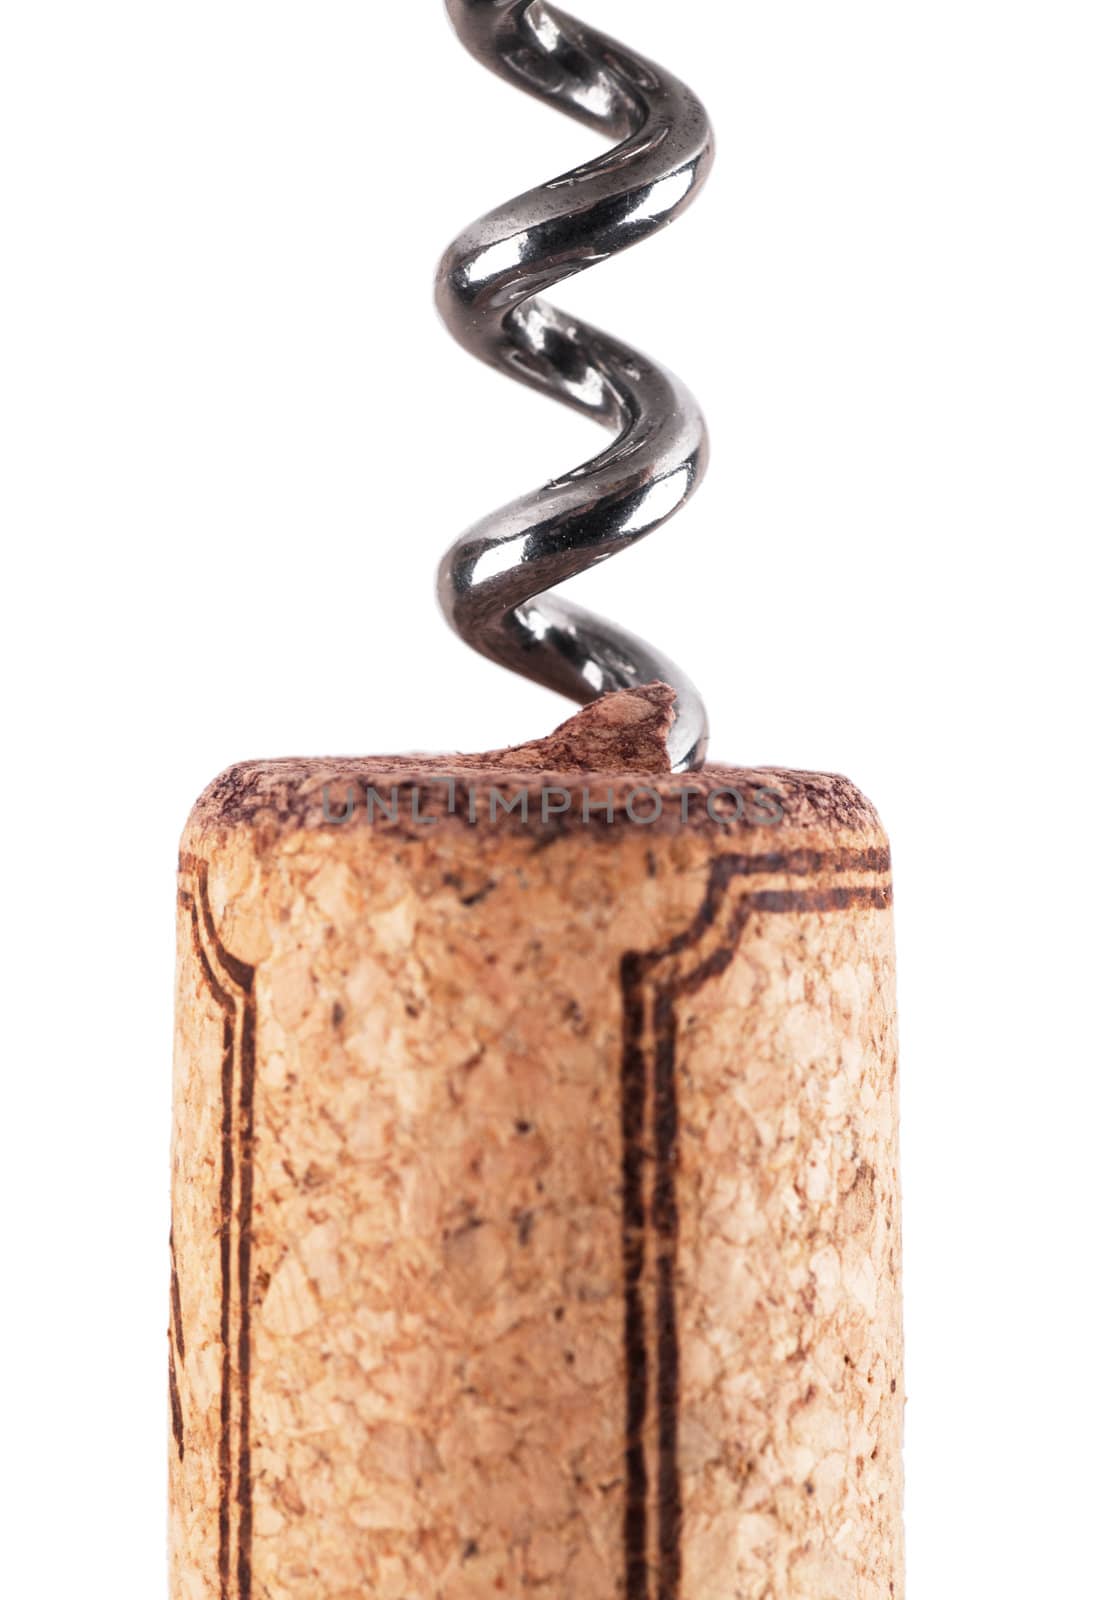 Closeup top view of spiral wine corkscrew over white background